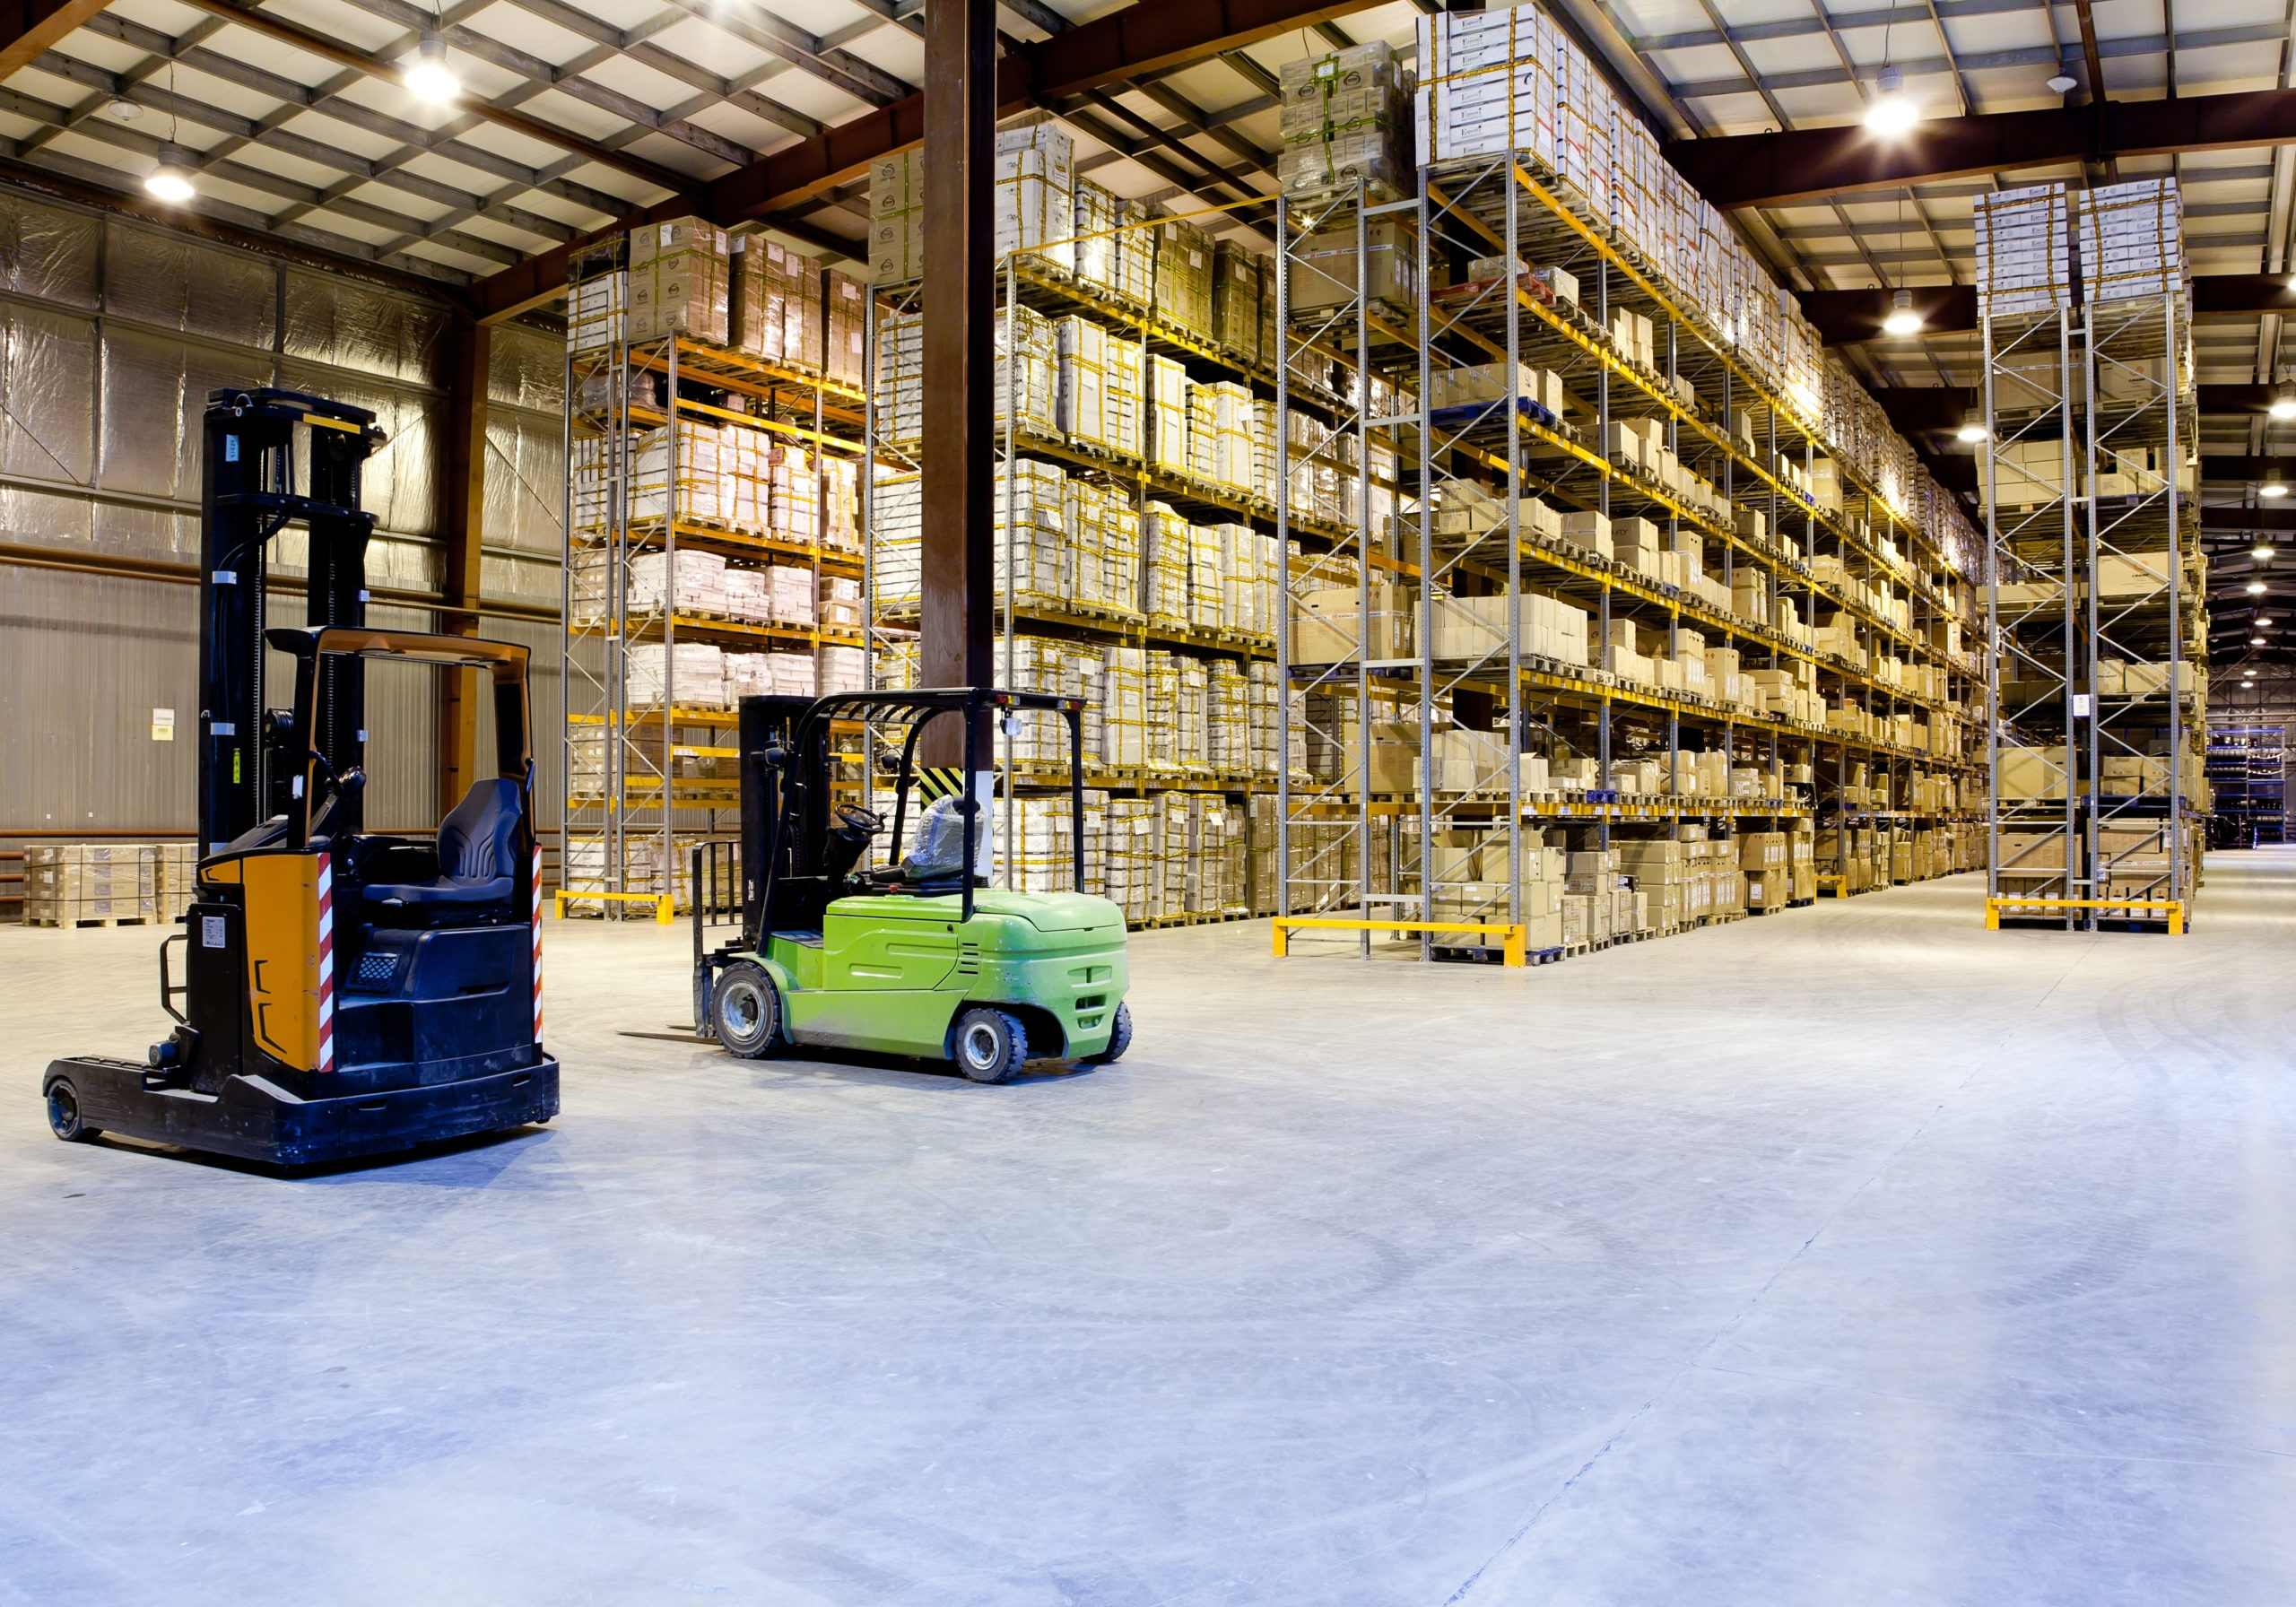 Our Santa Rosa Based Warehouse Makes It Possible To Hand Fast, Same-Day Repairs | Common Sense Business Solutions